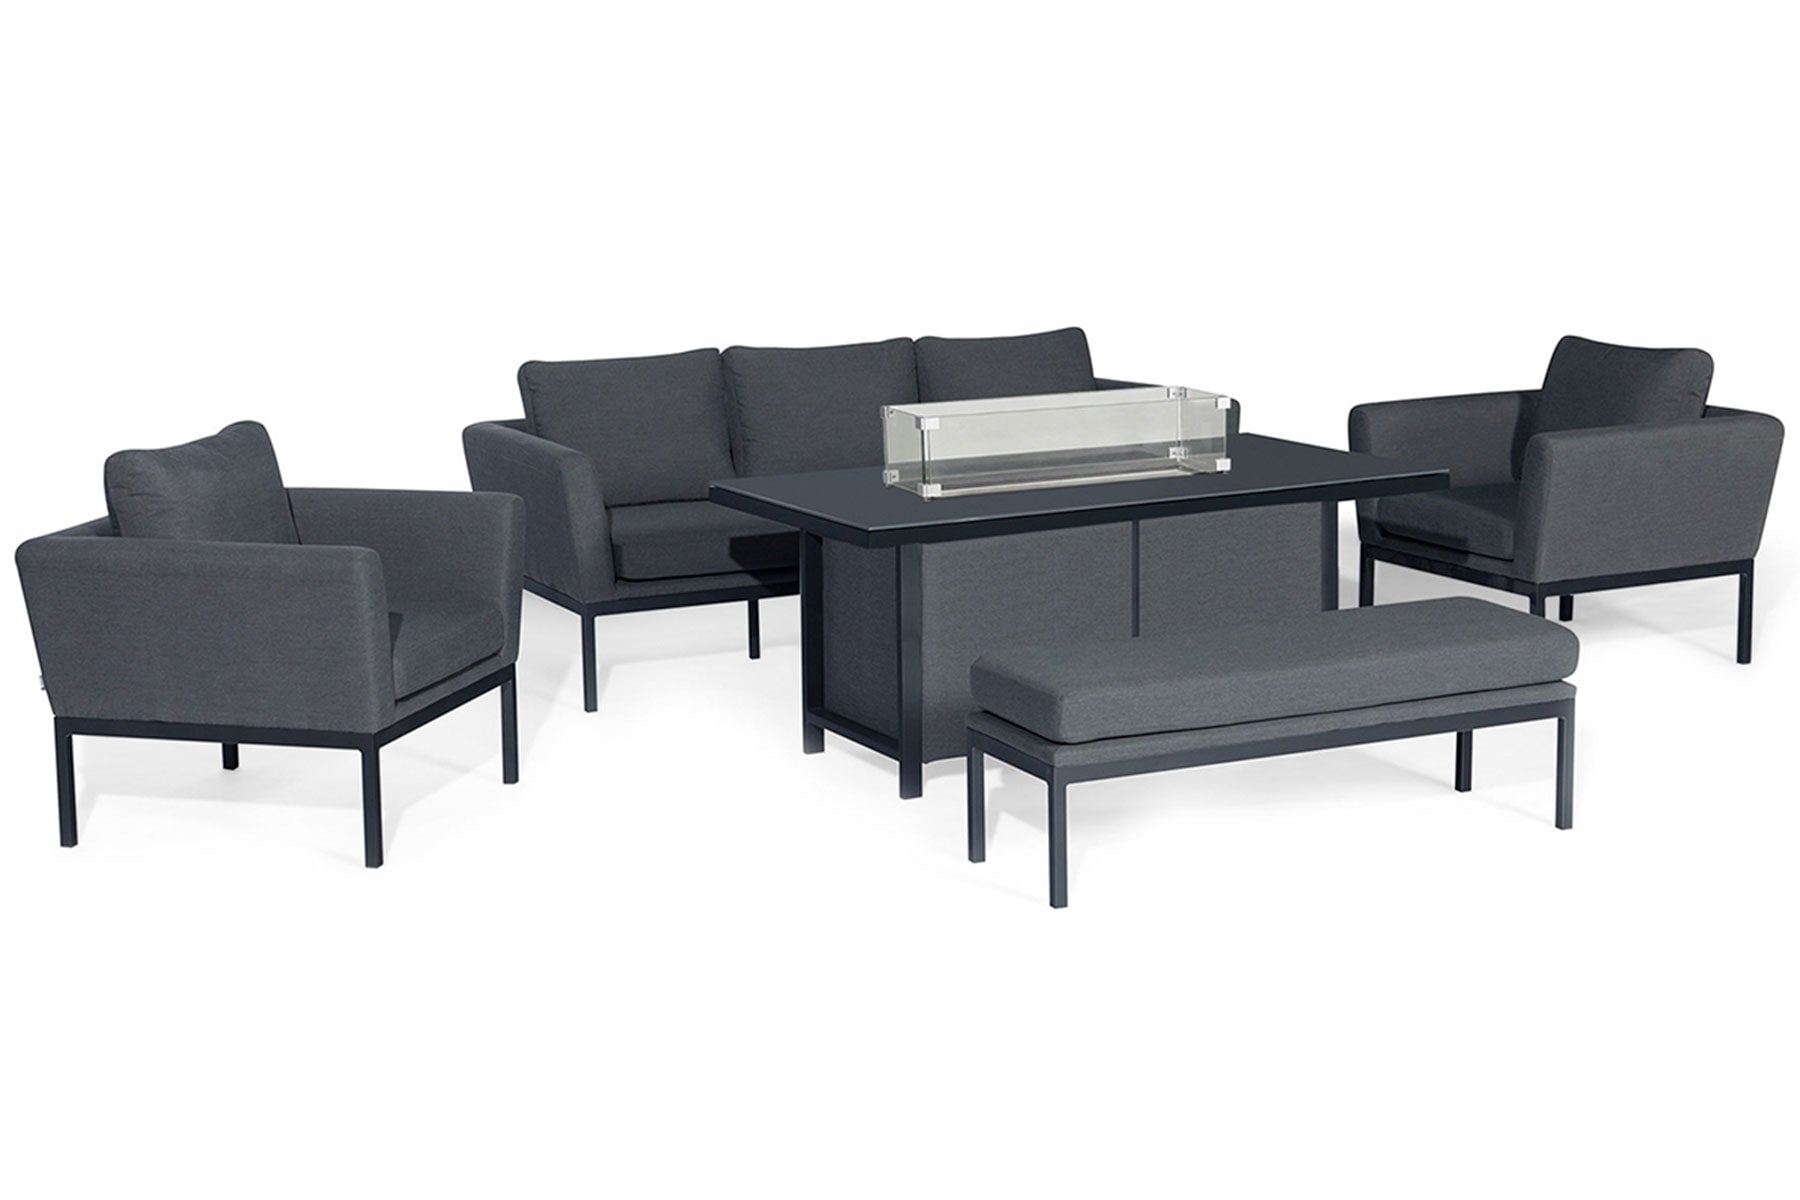 Pulse 3 Seat Sofa Dining Set with Fire Pit | Charcoal